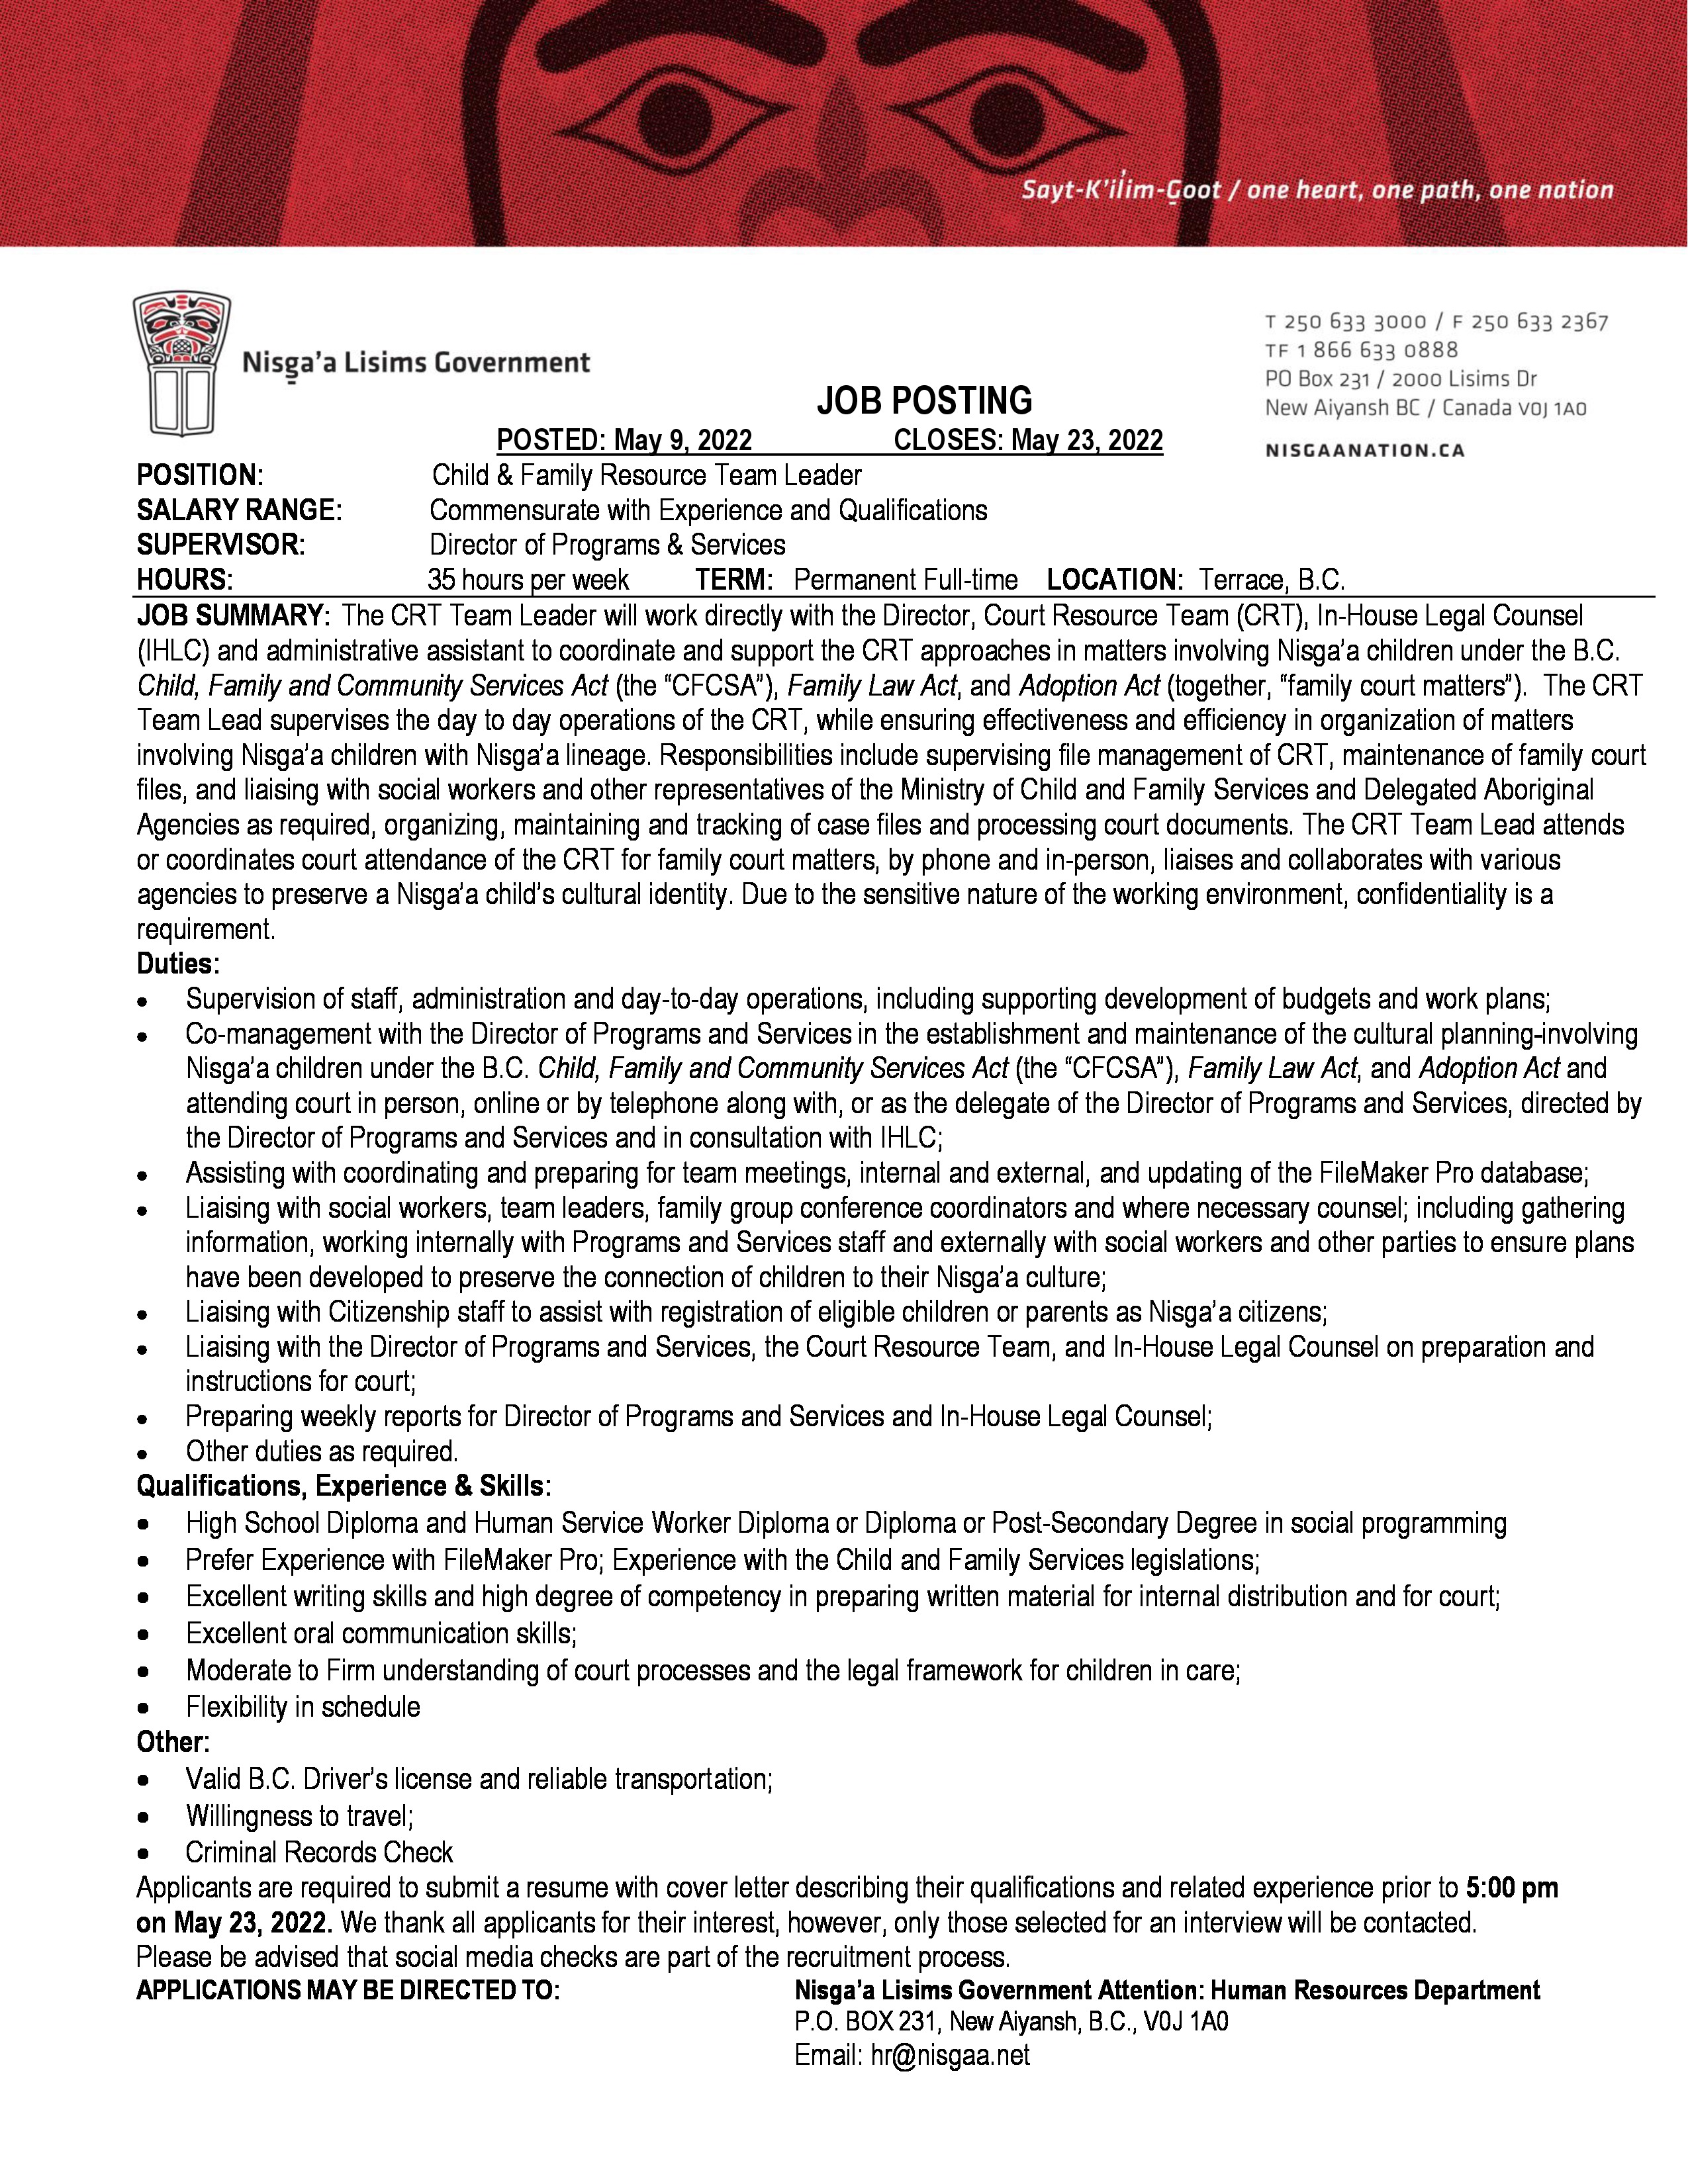 Employment Opportunity - Child & Family Resource Team Leader - Closing May 23, 2022